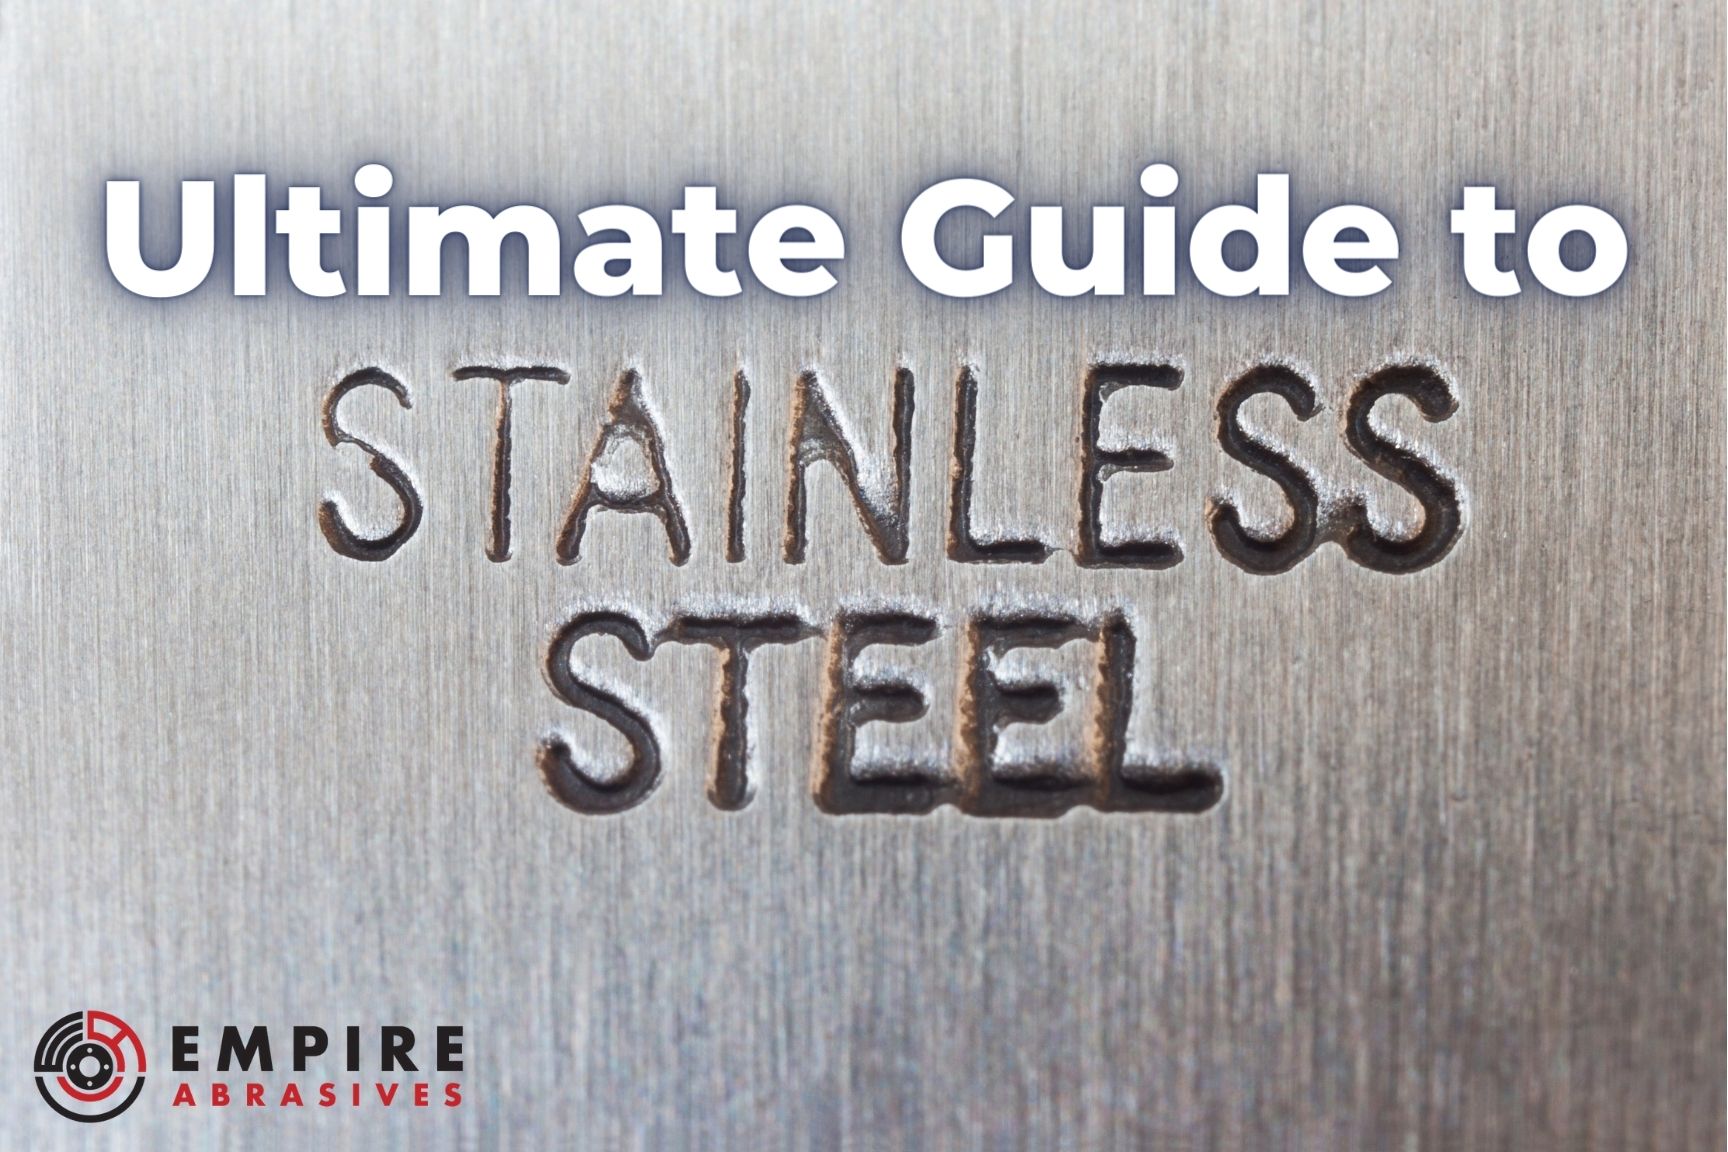 Ultimate Guide - Stainless Steel - Fabrication, Grinding, and Finishing  with Abrasives - Empire Abrasives